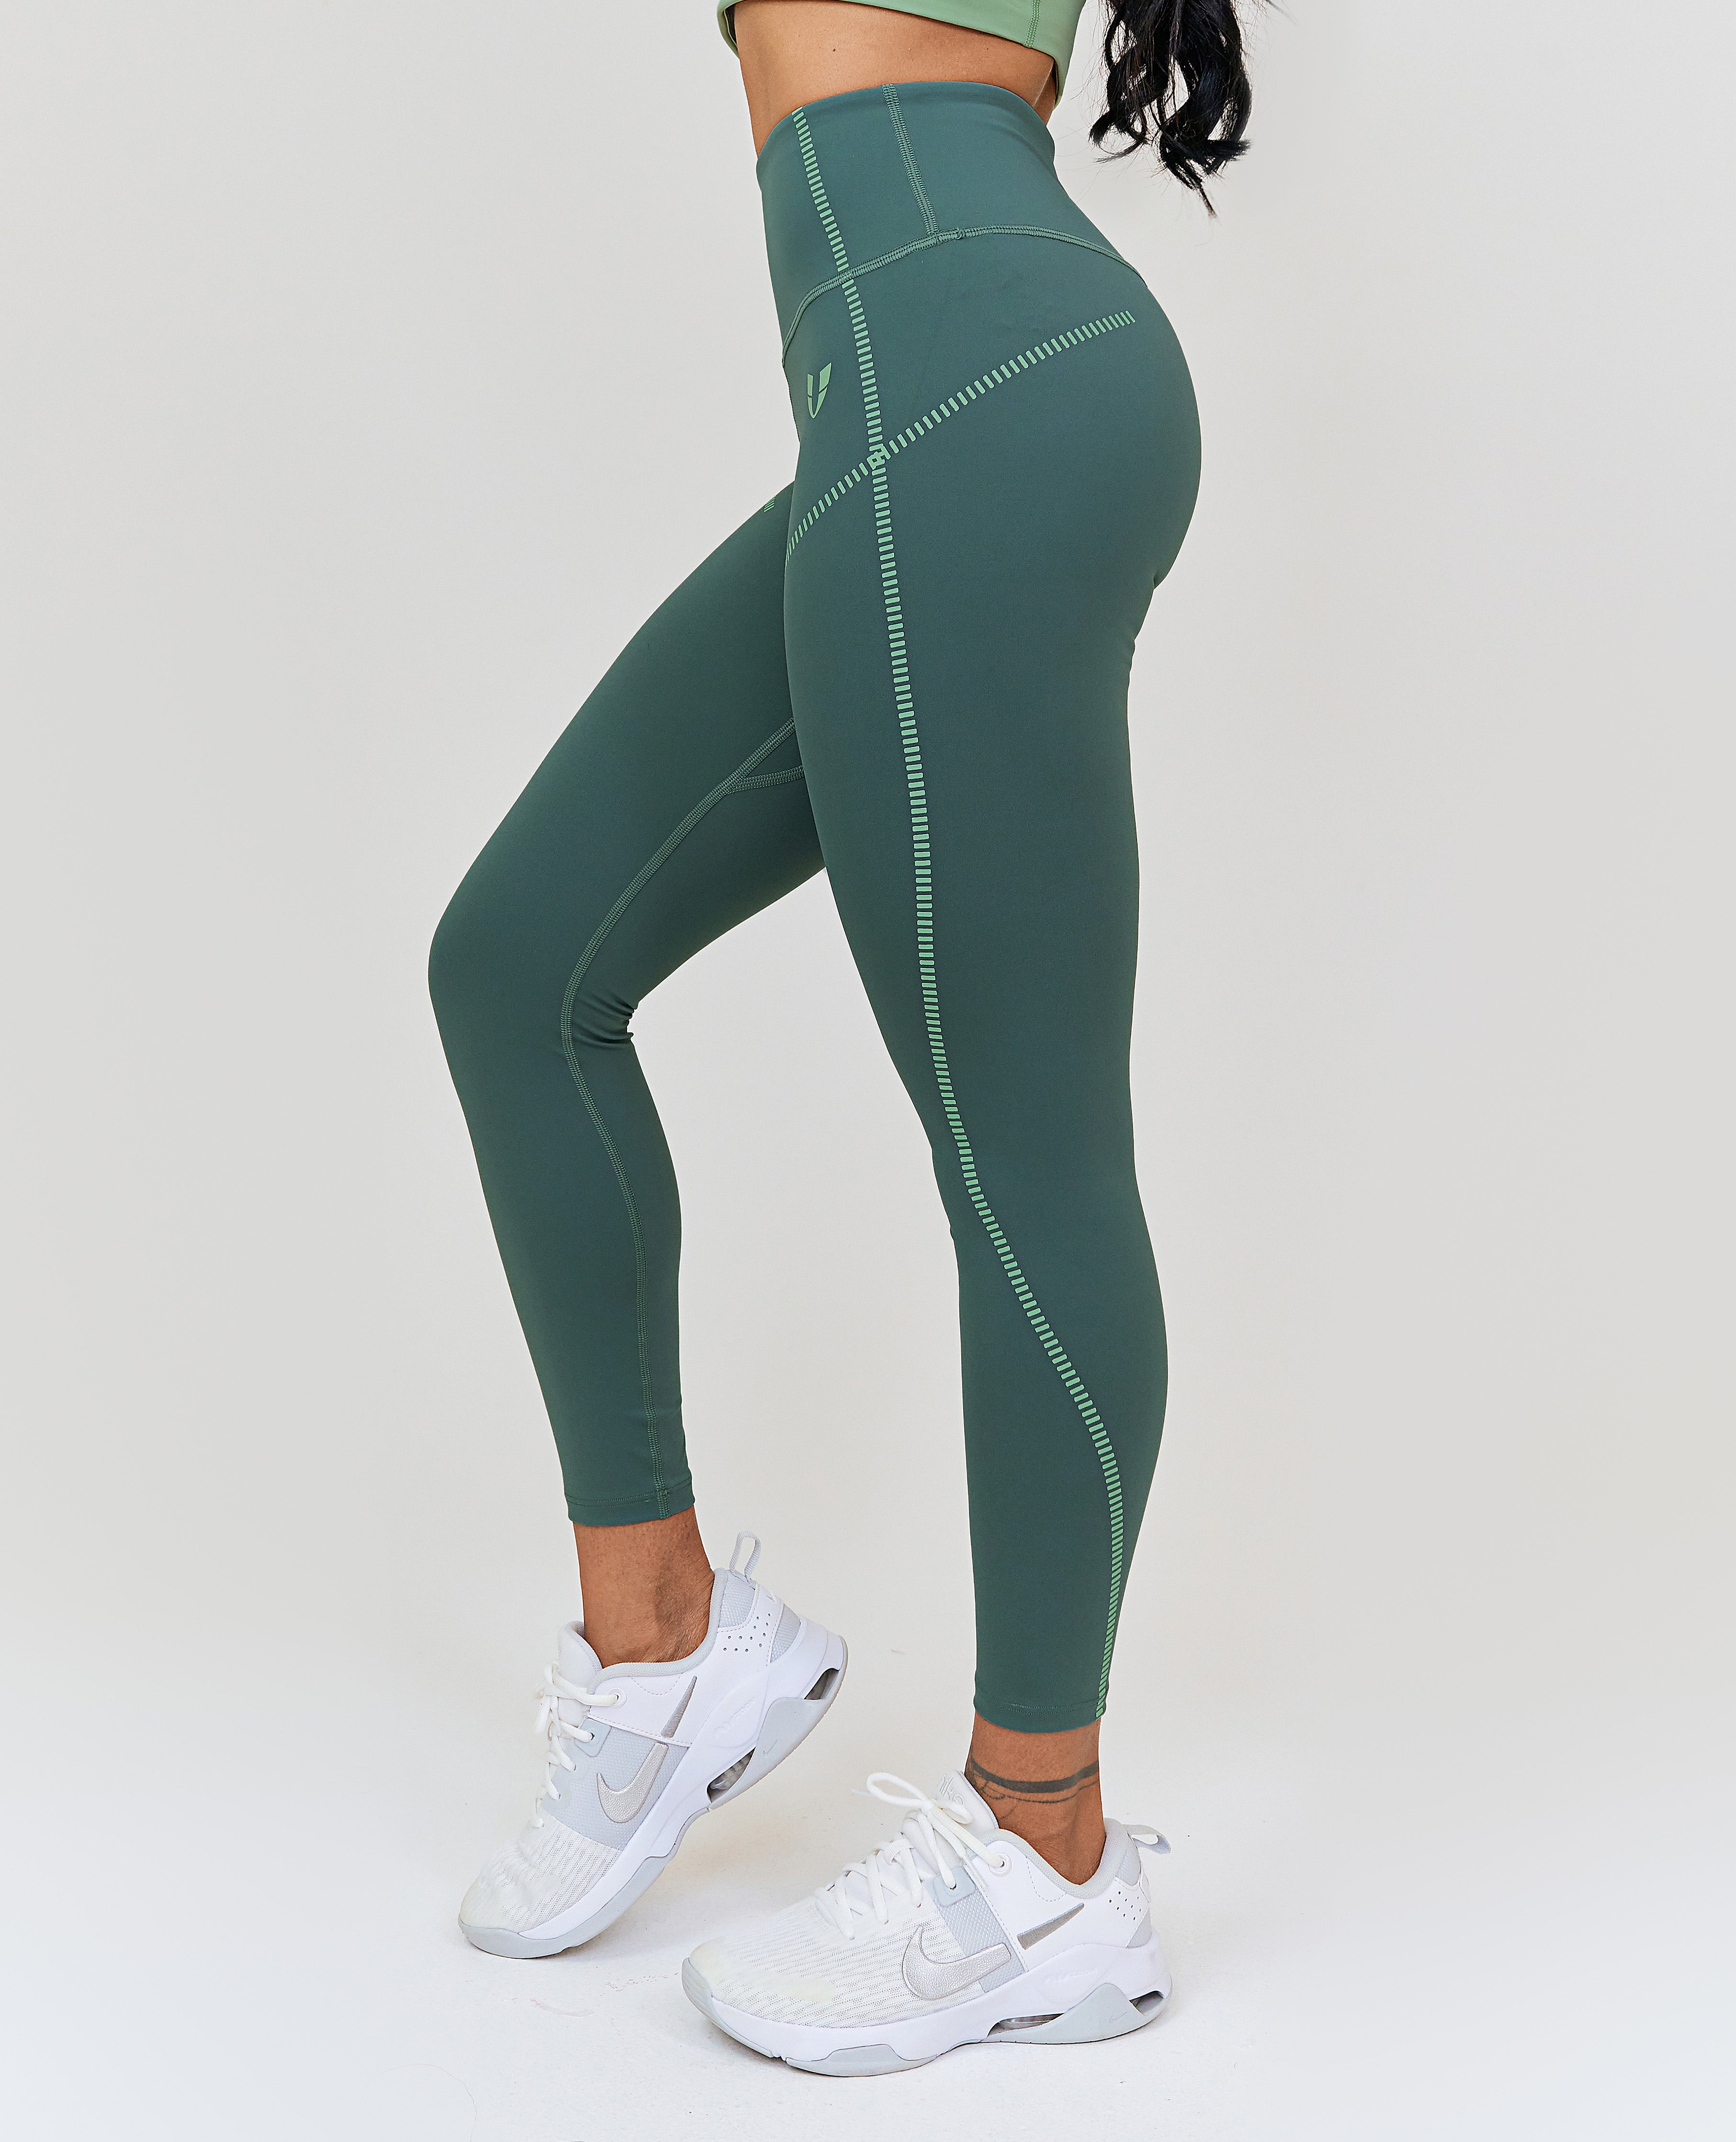 Activewear Clearance Sale: Get Up To 70% Off